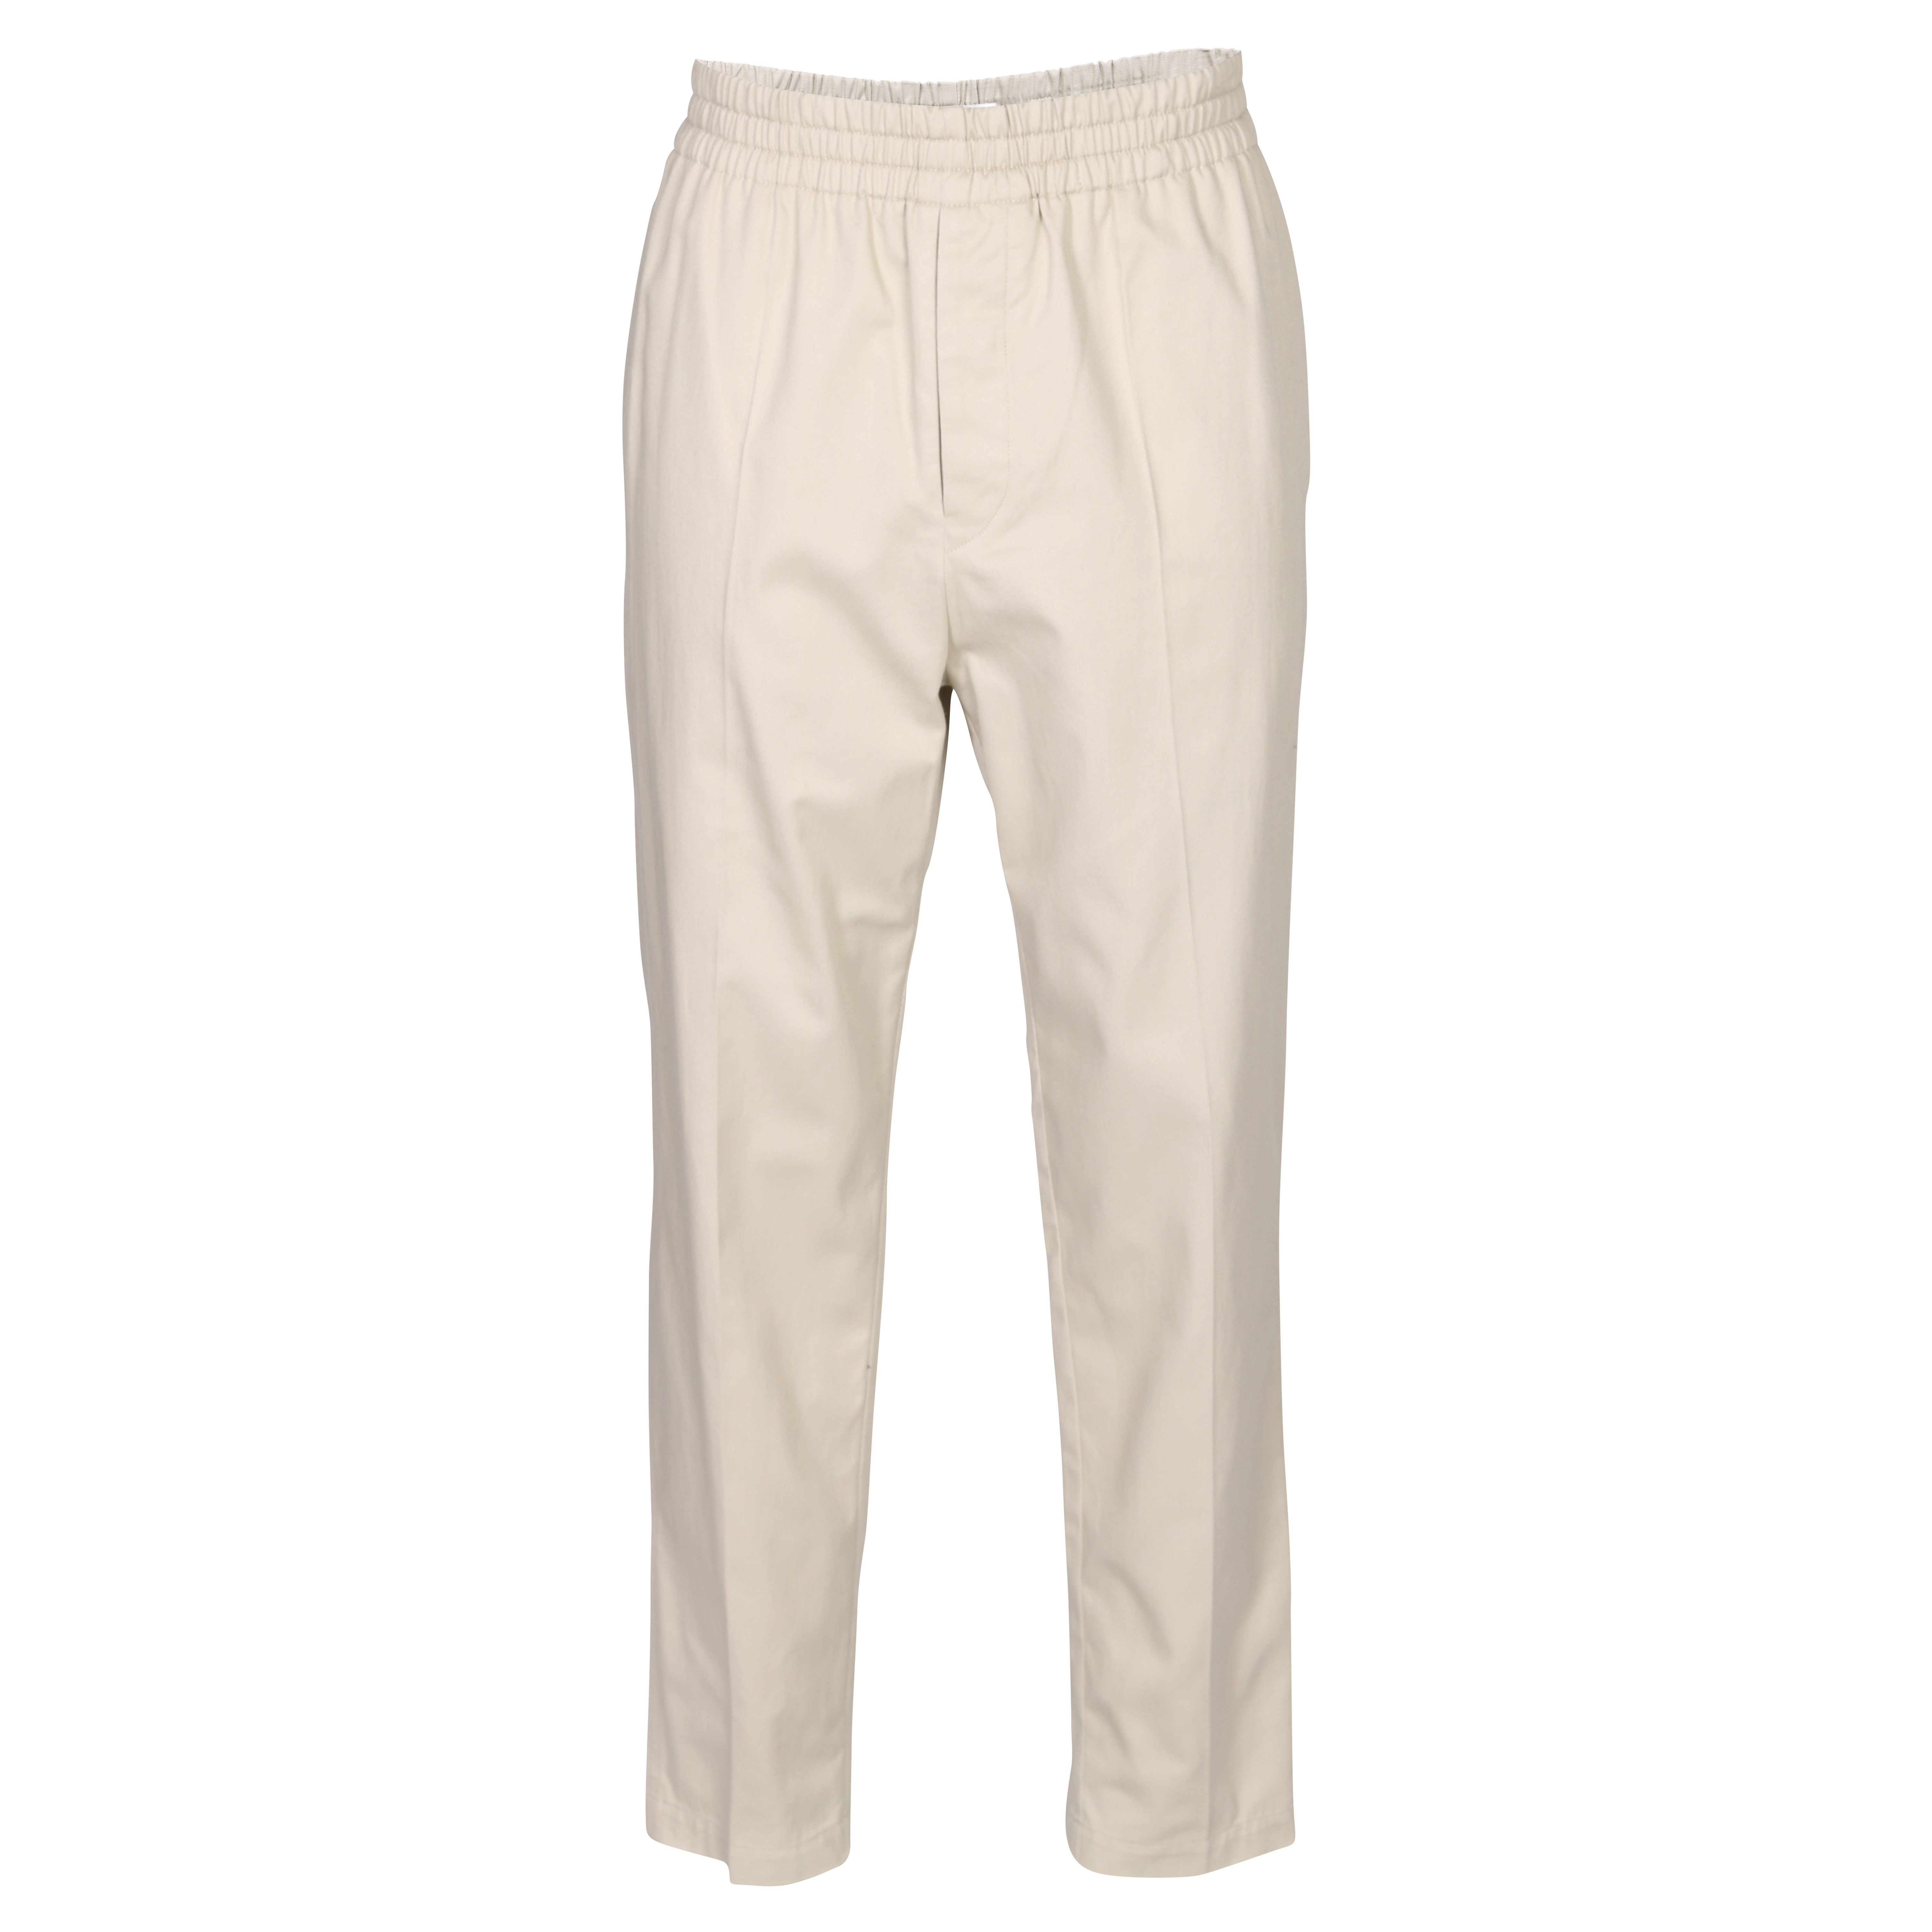 Isabel Marant Nailo Pant in Beige